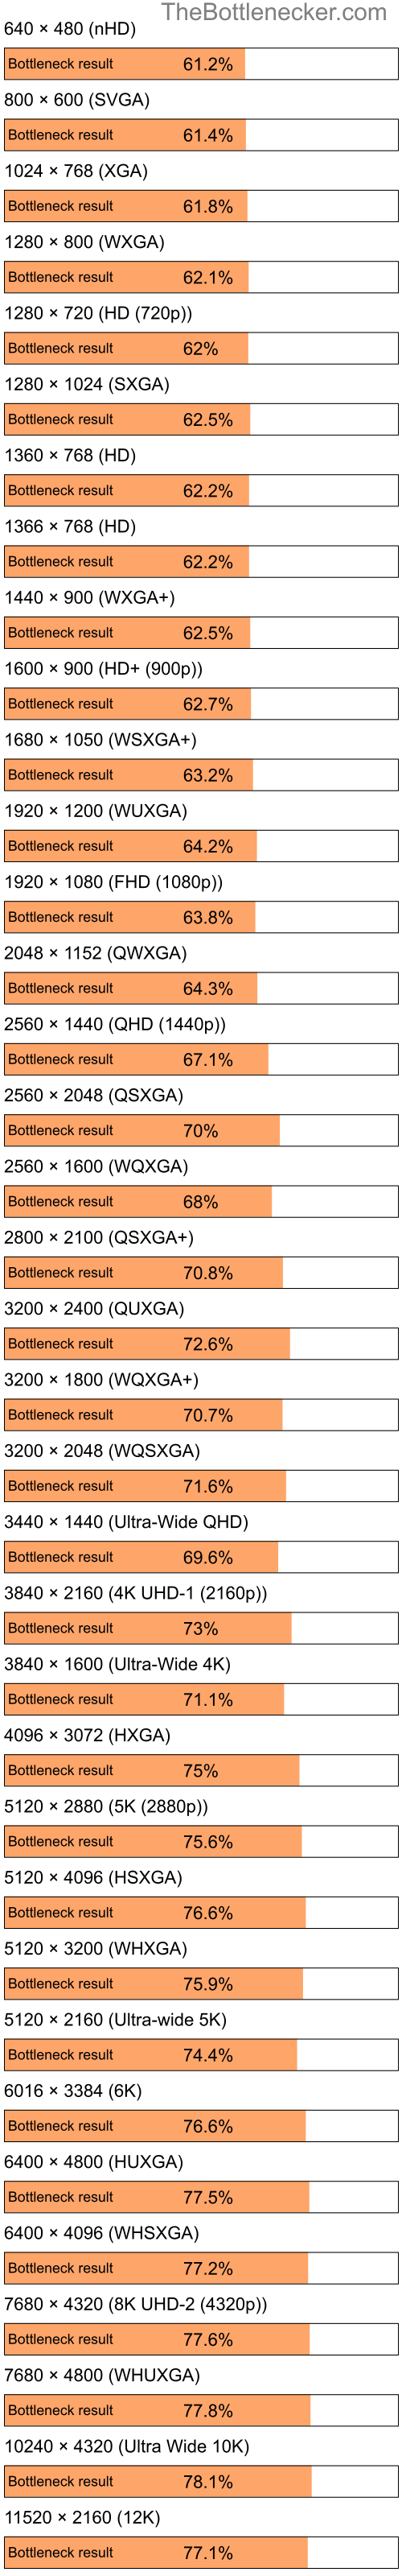 Bottleneck results by resolution for Intel Celeron M 410 and AMD Mobility Radeon HD 2400 XT in General Tasks